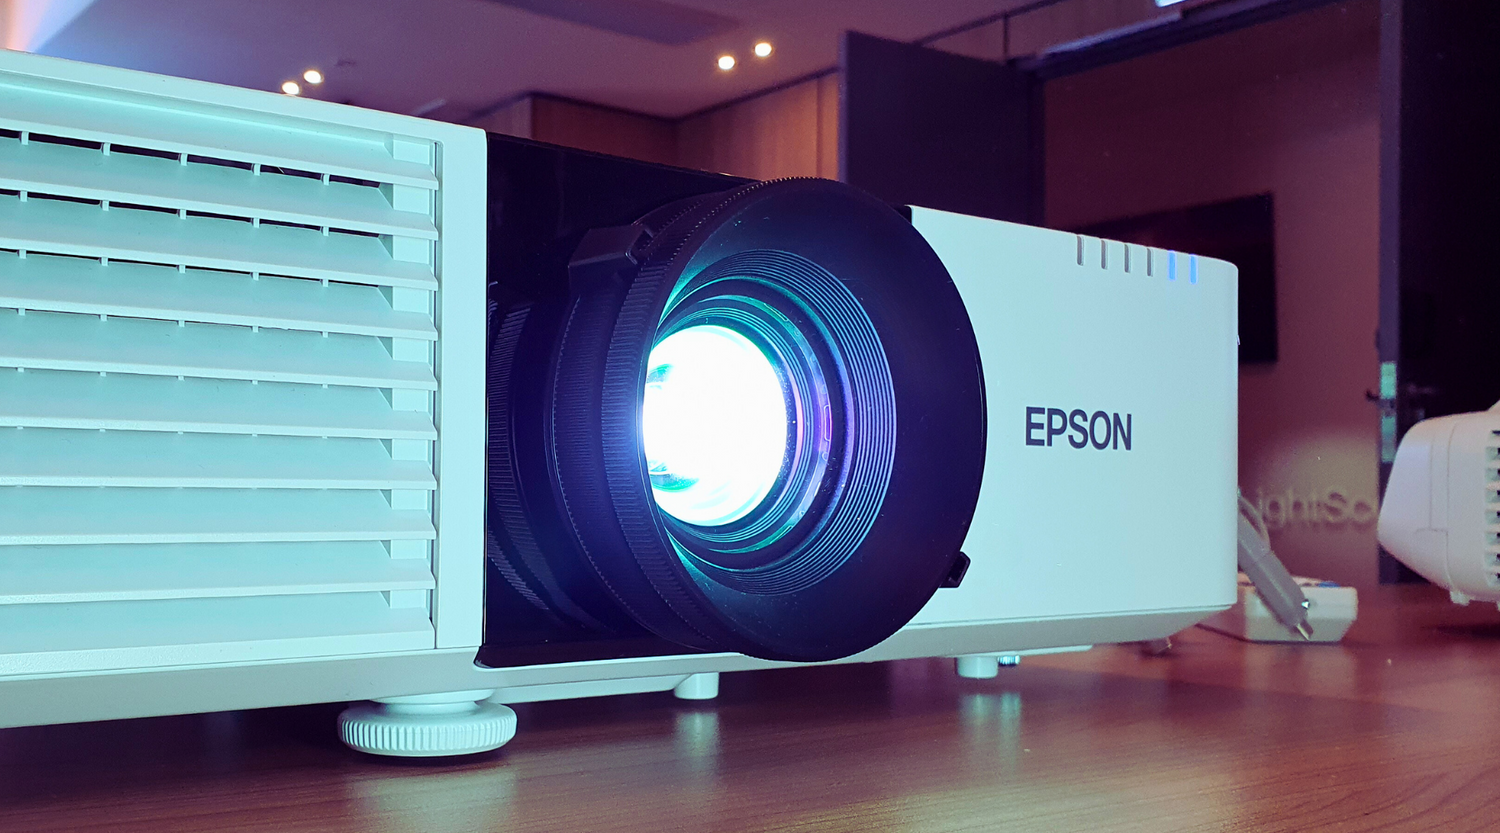 Audio Visual Systems from Evolve Equipment Management, Epson Projectors